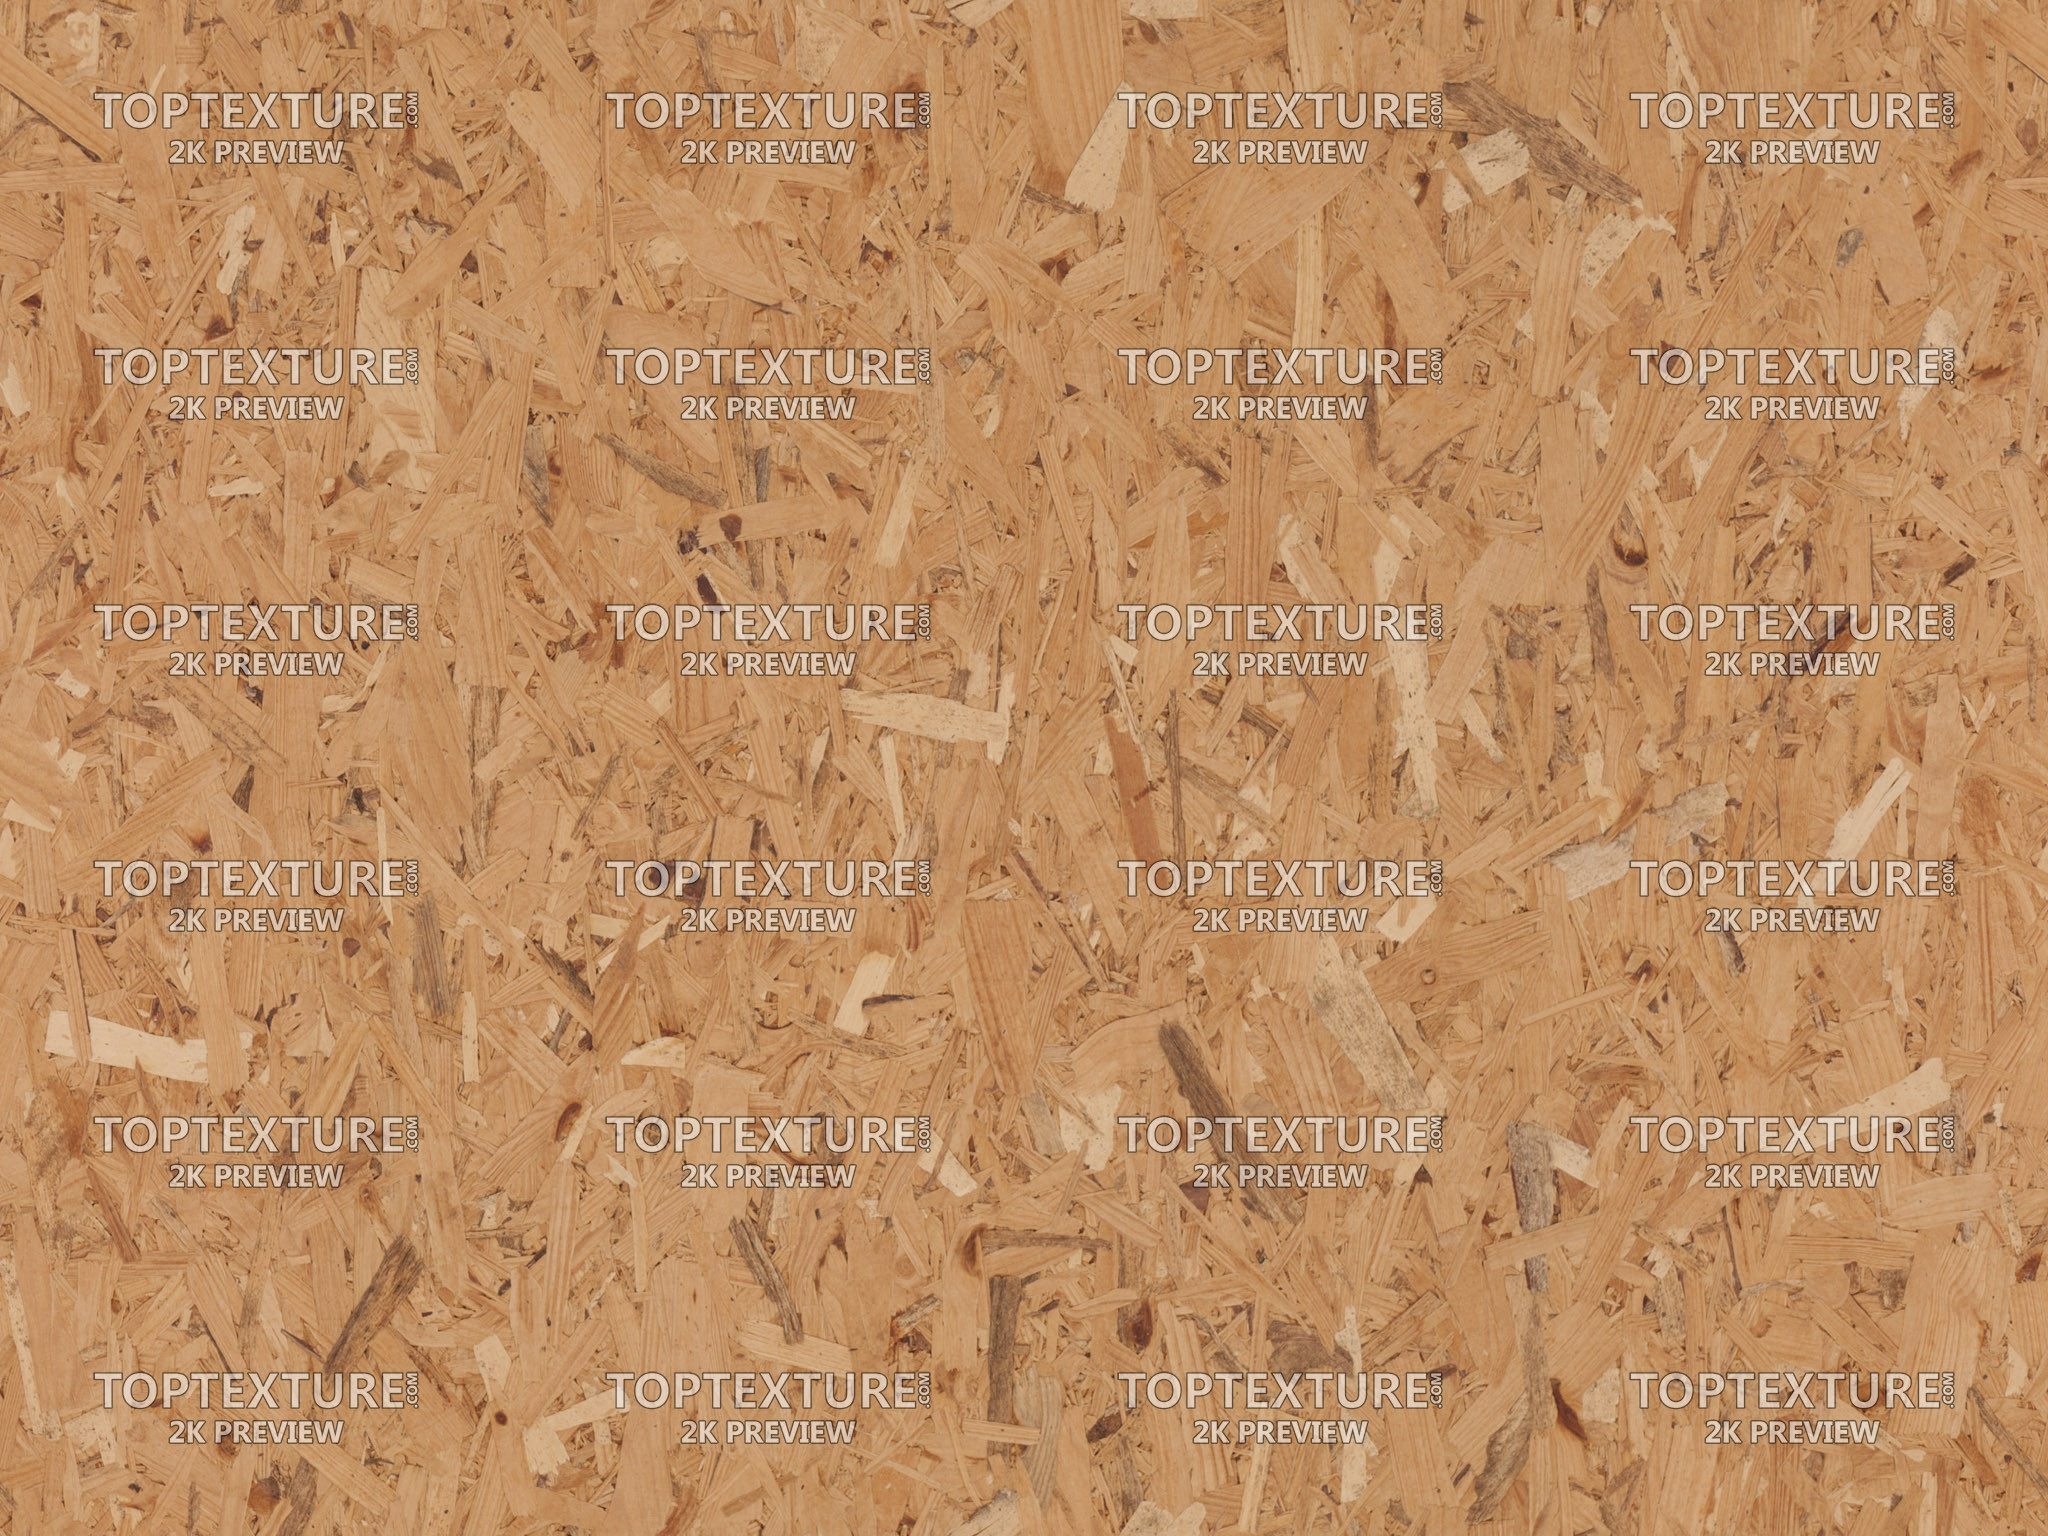 Oriented Strand Board - 2K preview